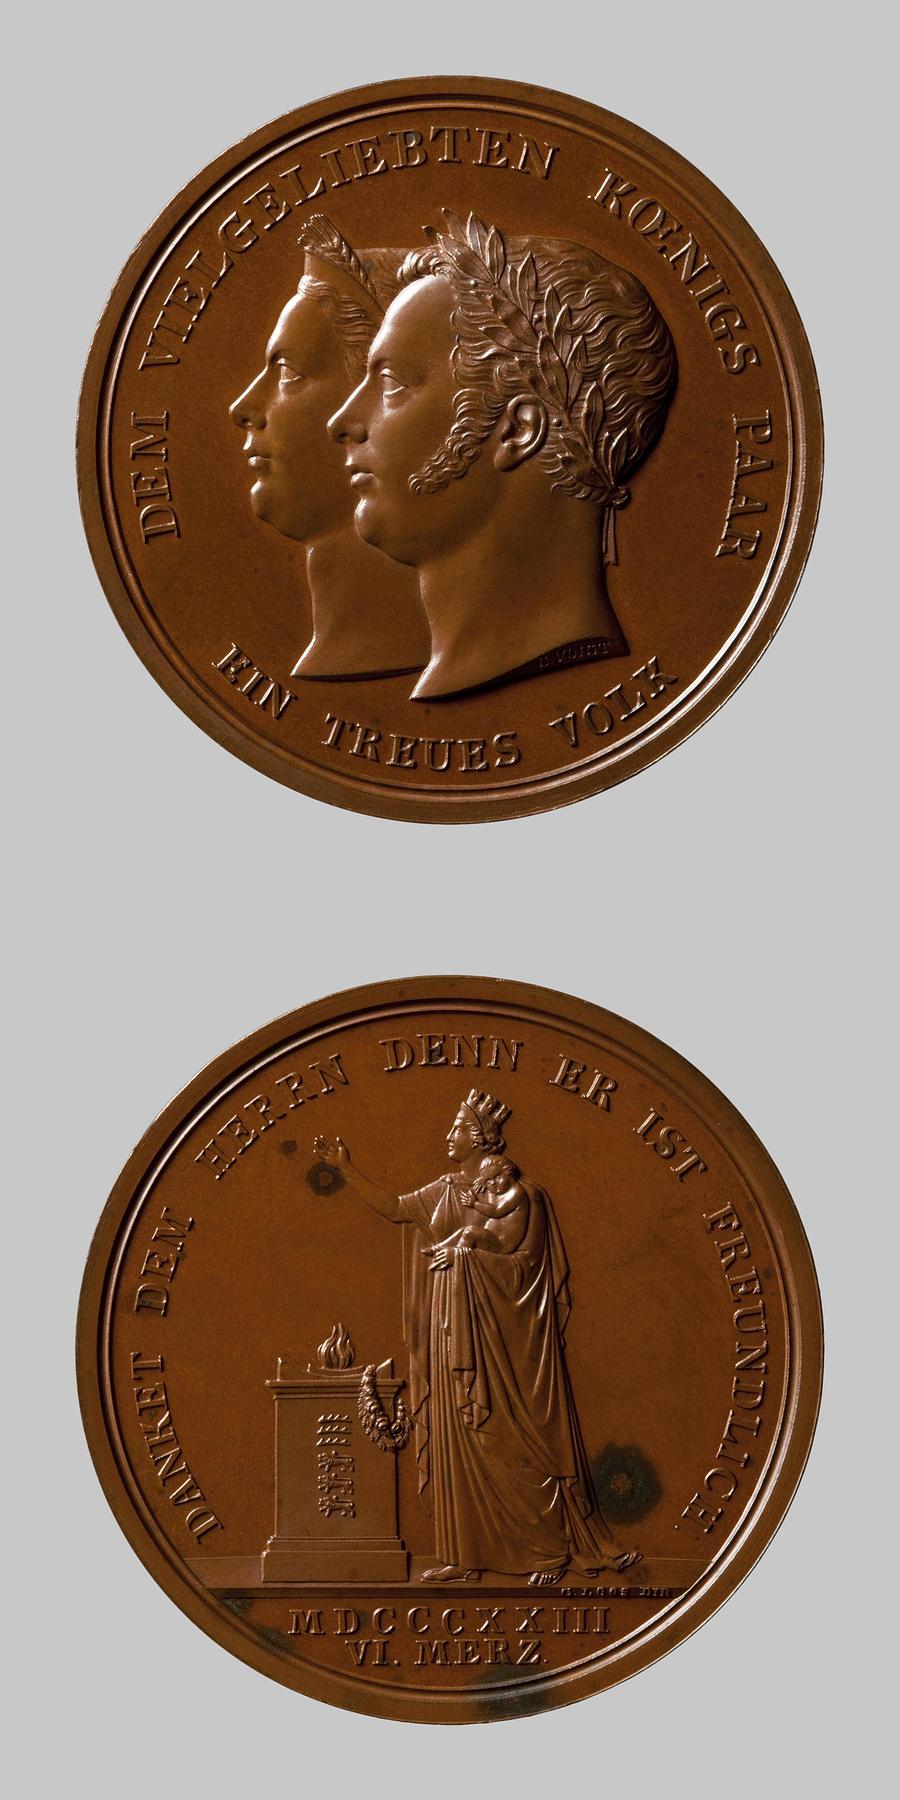 Medal obverse: King Wilhelm I and Queen Pauline of Württemberg. Medal reverse: Württemberg thanks Heaven for the new heir to the throne by the homeland altar, F117